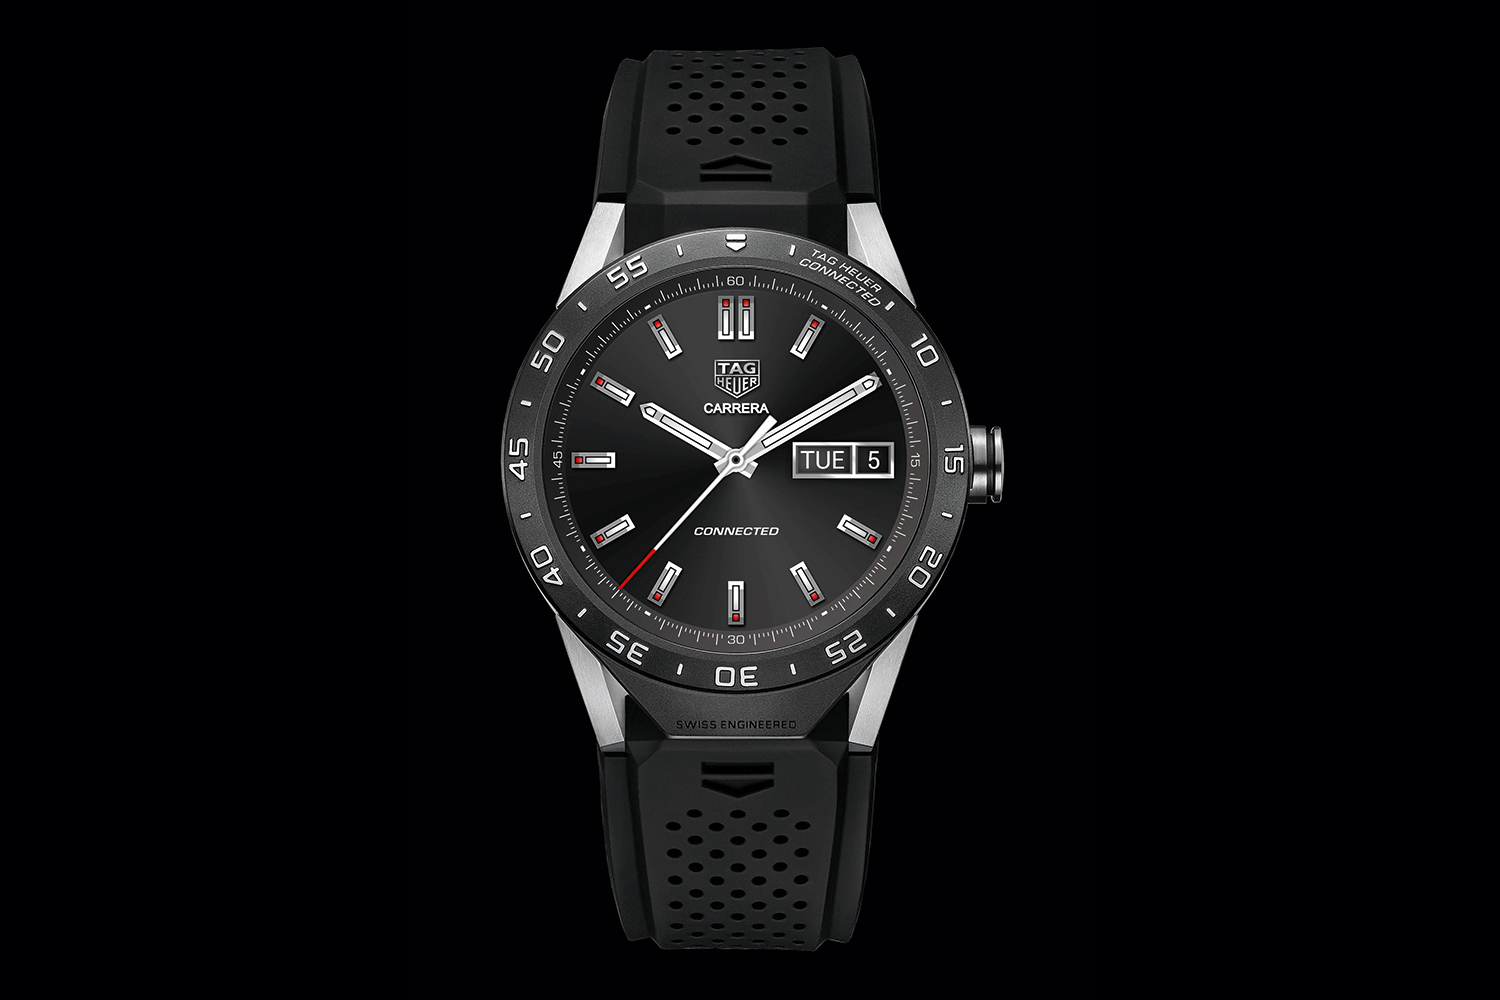 tag heuer smartwatch apps development news tagheuerconnected10